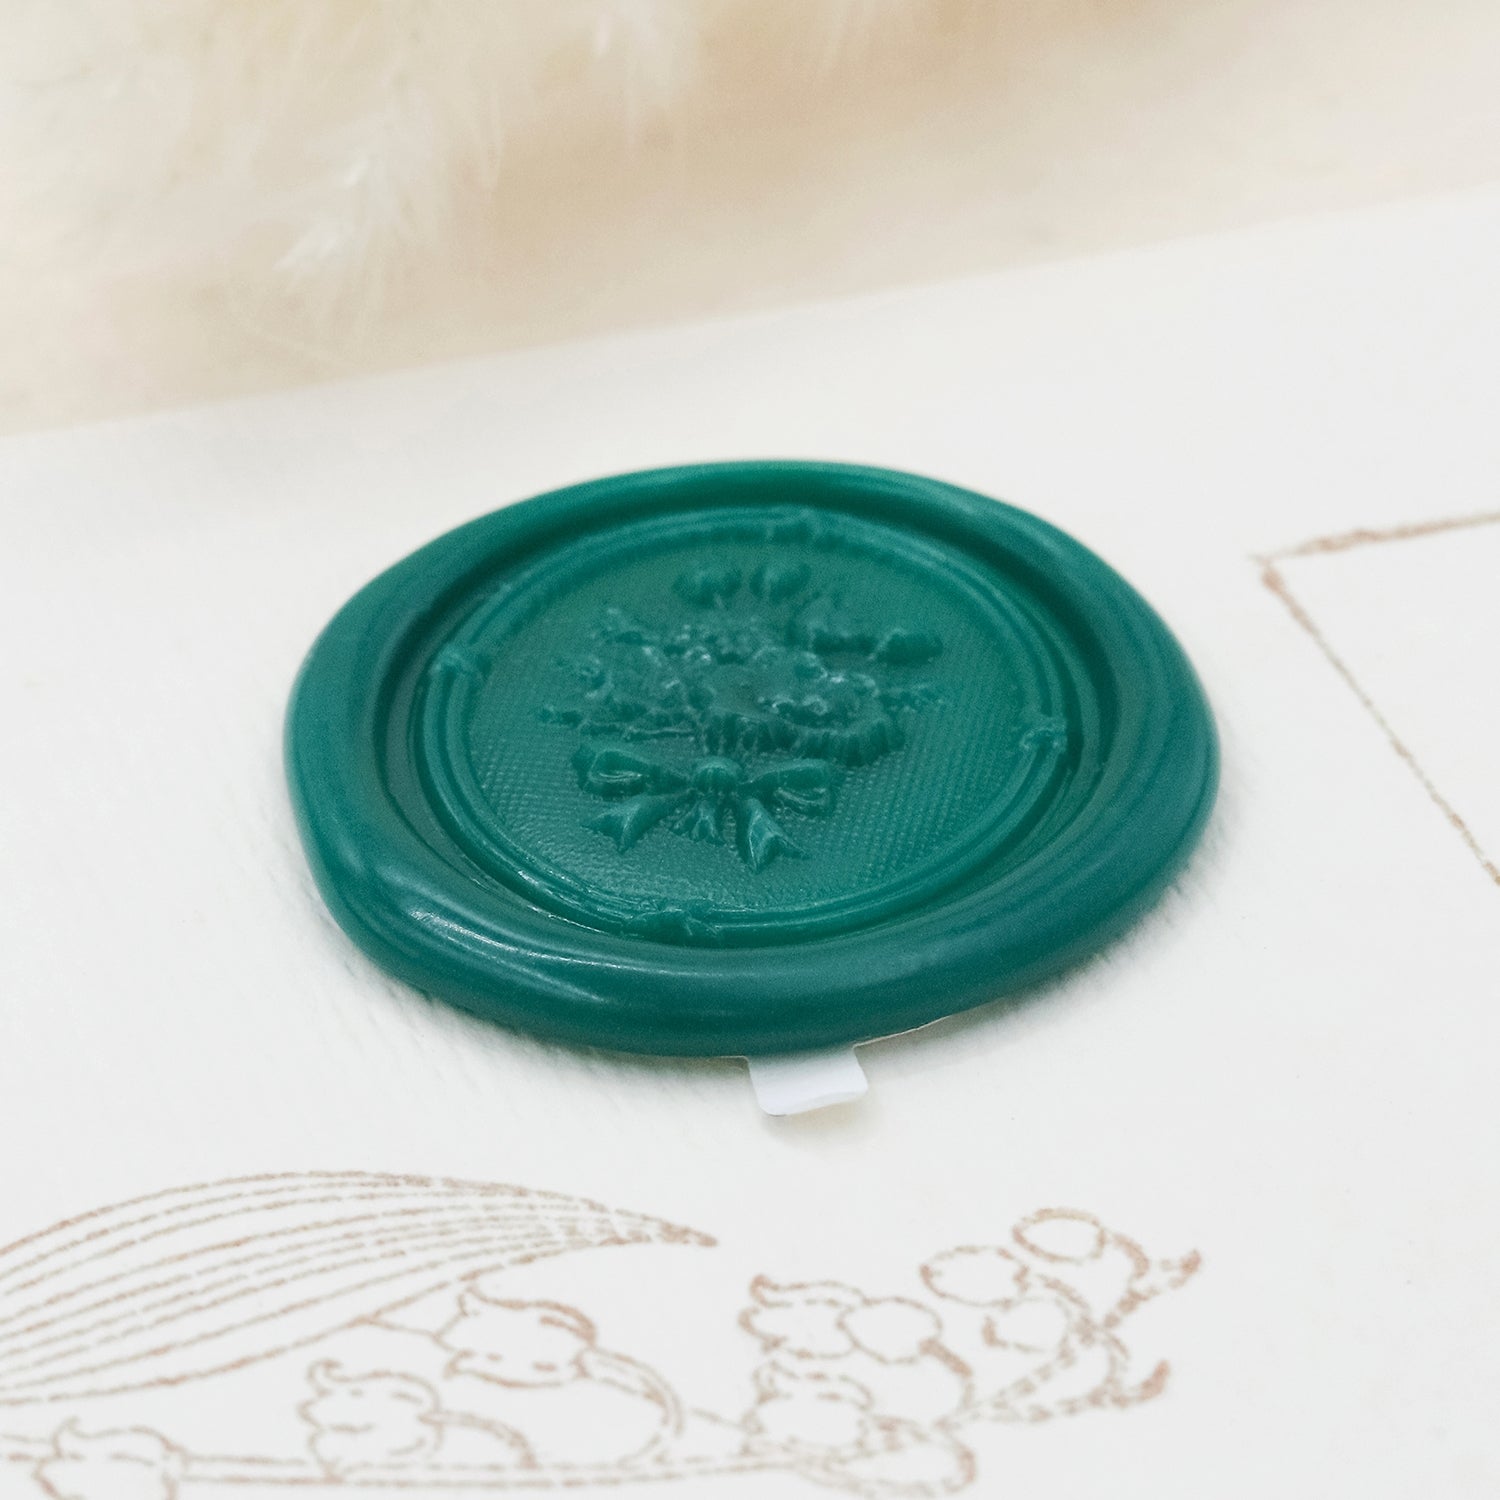 Stamprints 3D Relief Bouquet Self-adhesive Wax Seal Stickers 4